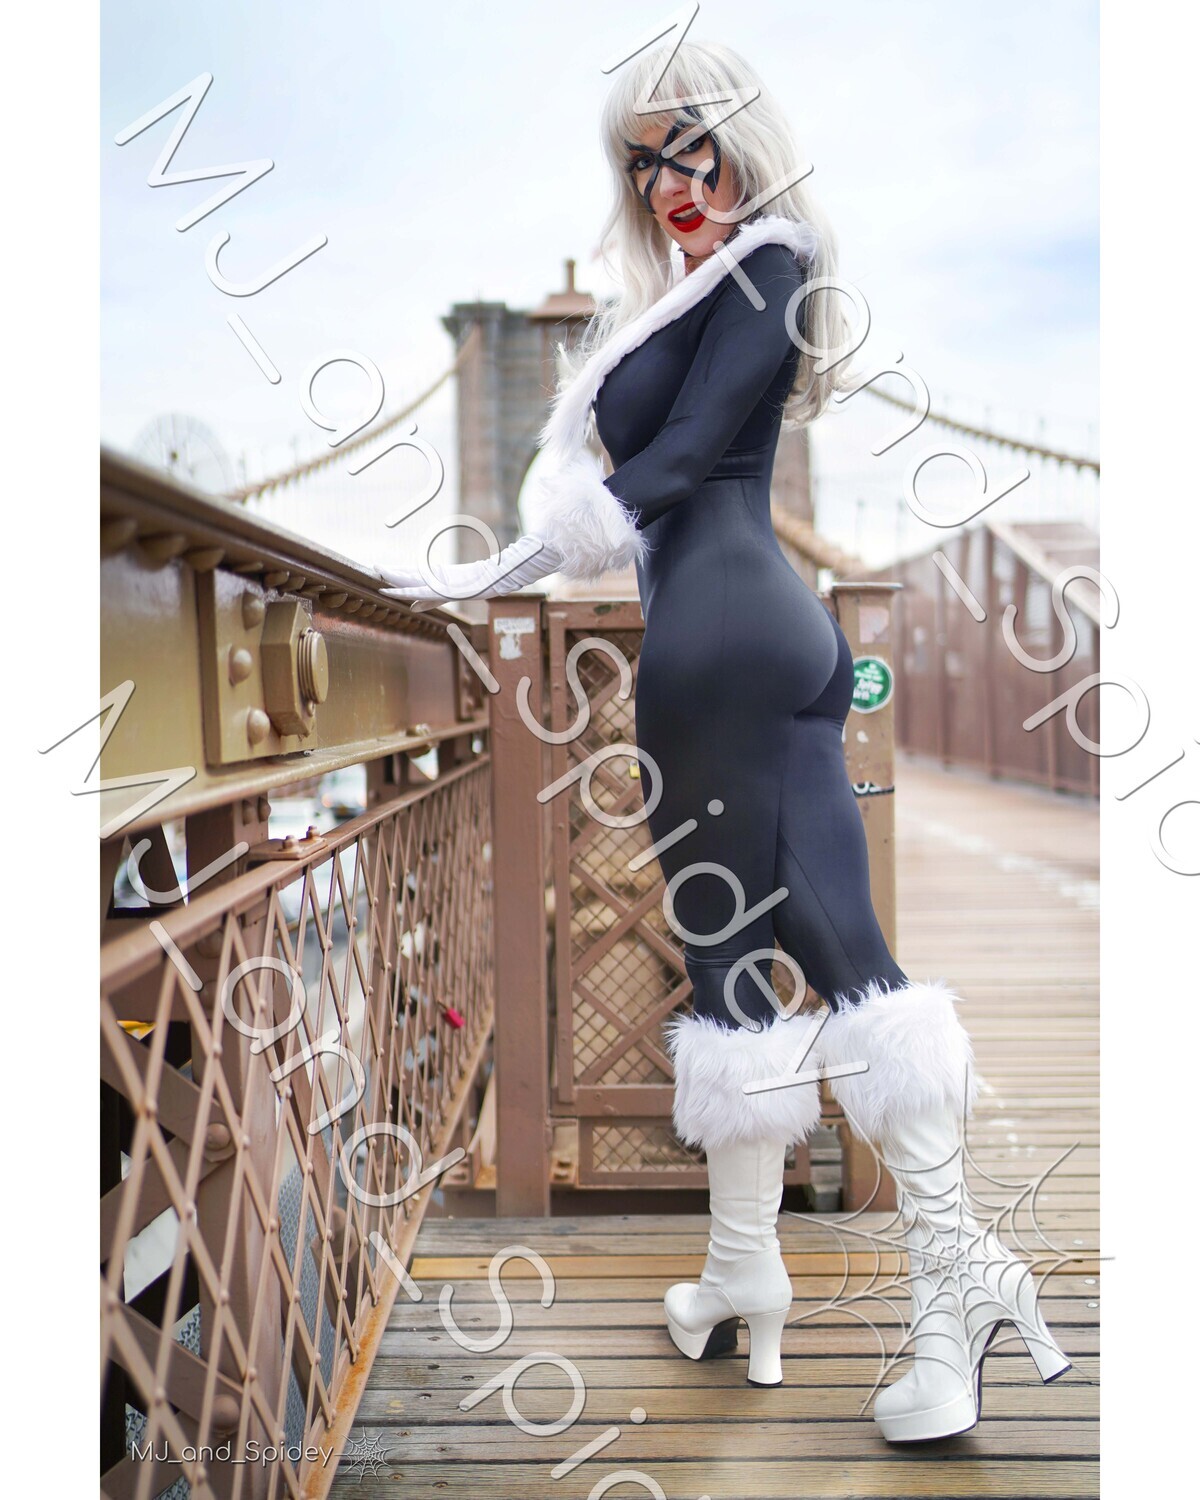 Marvel - Spider-Man - Black Cat - Classic 4 -  Cosplay Print (@MJ_and_Spidey, MJ and Spidey, Comics)